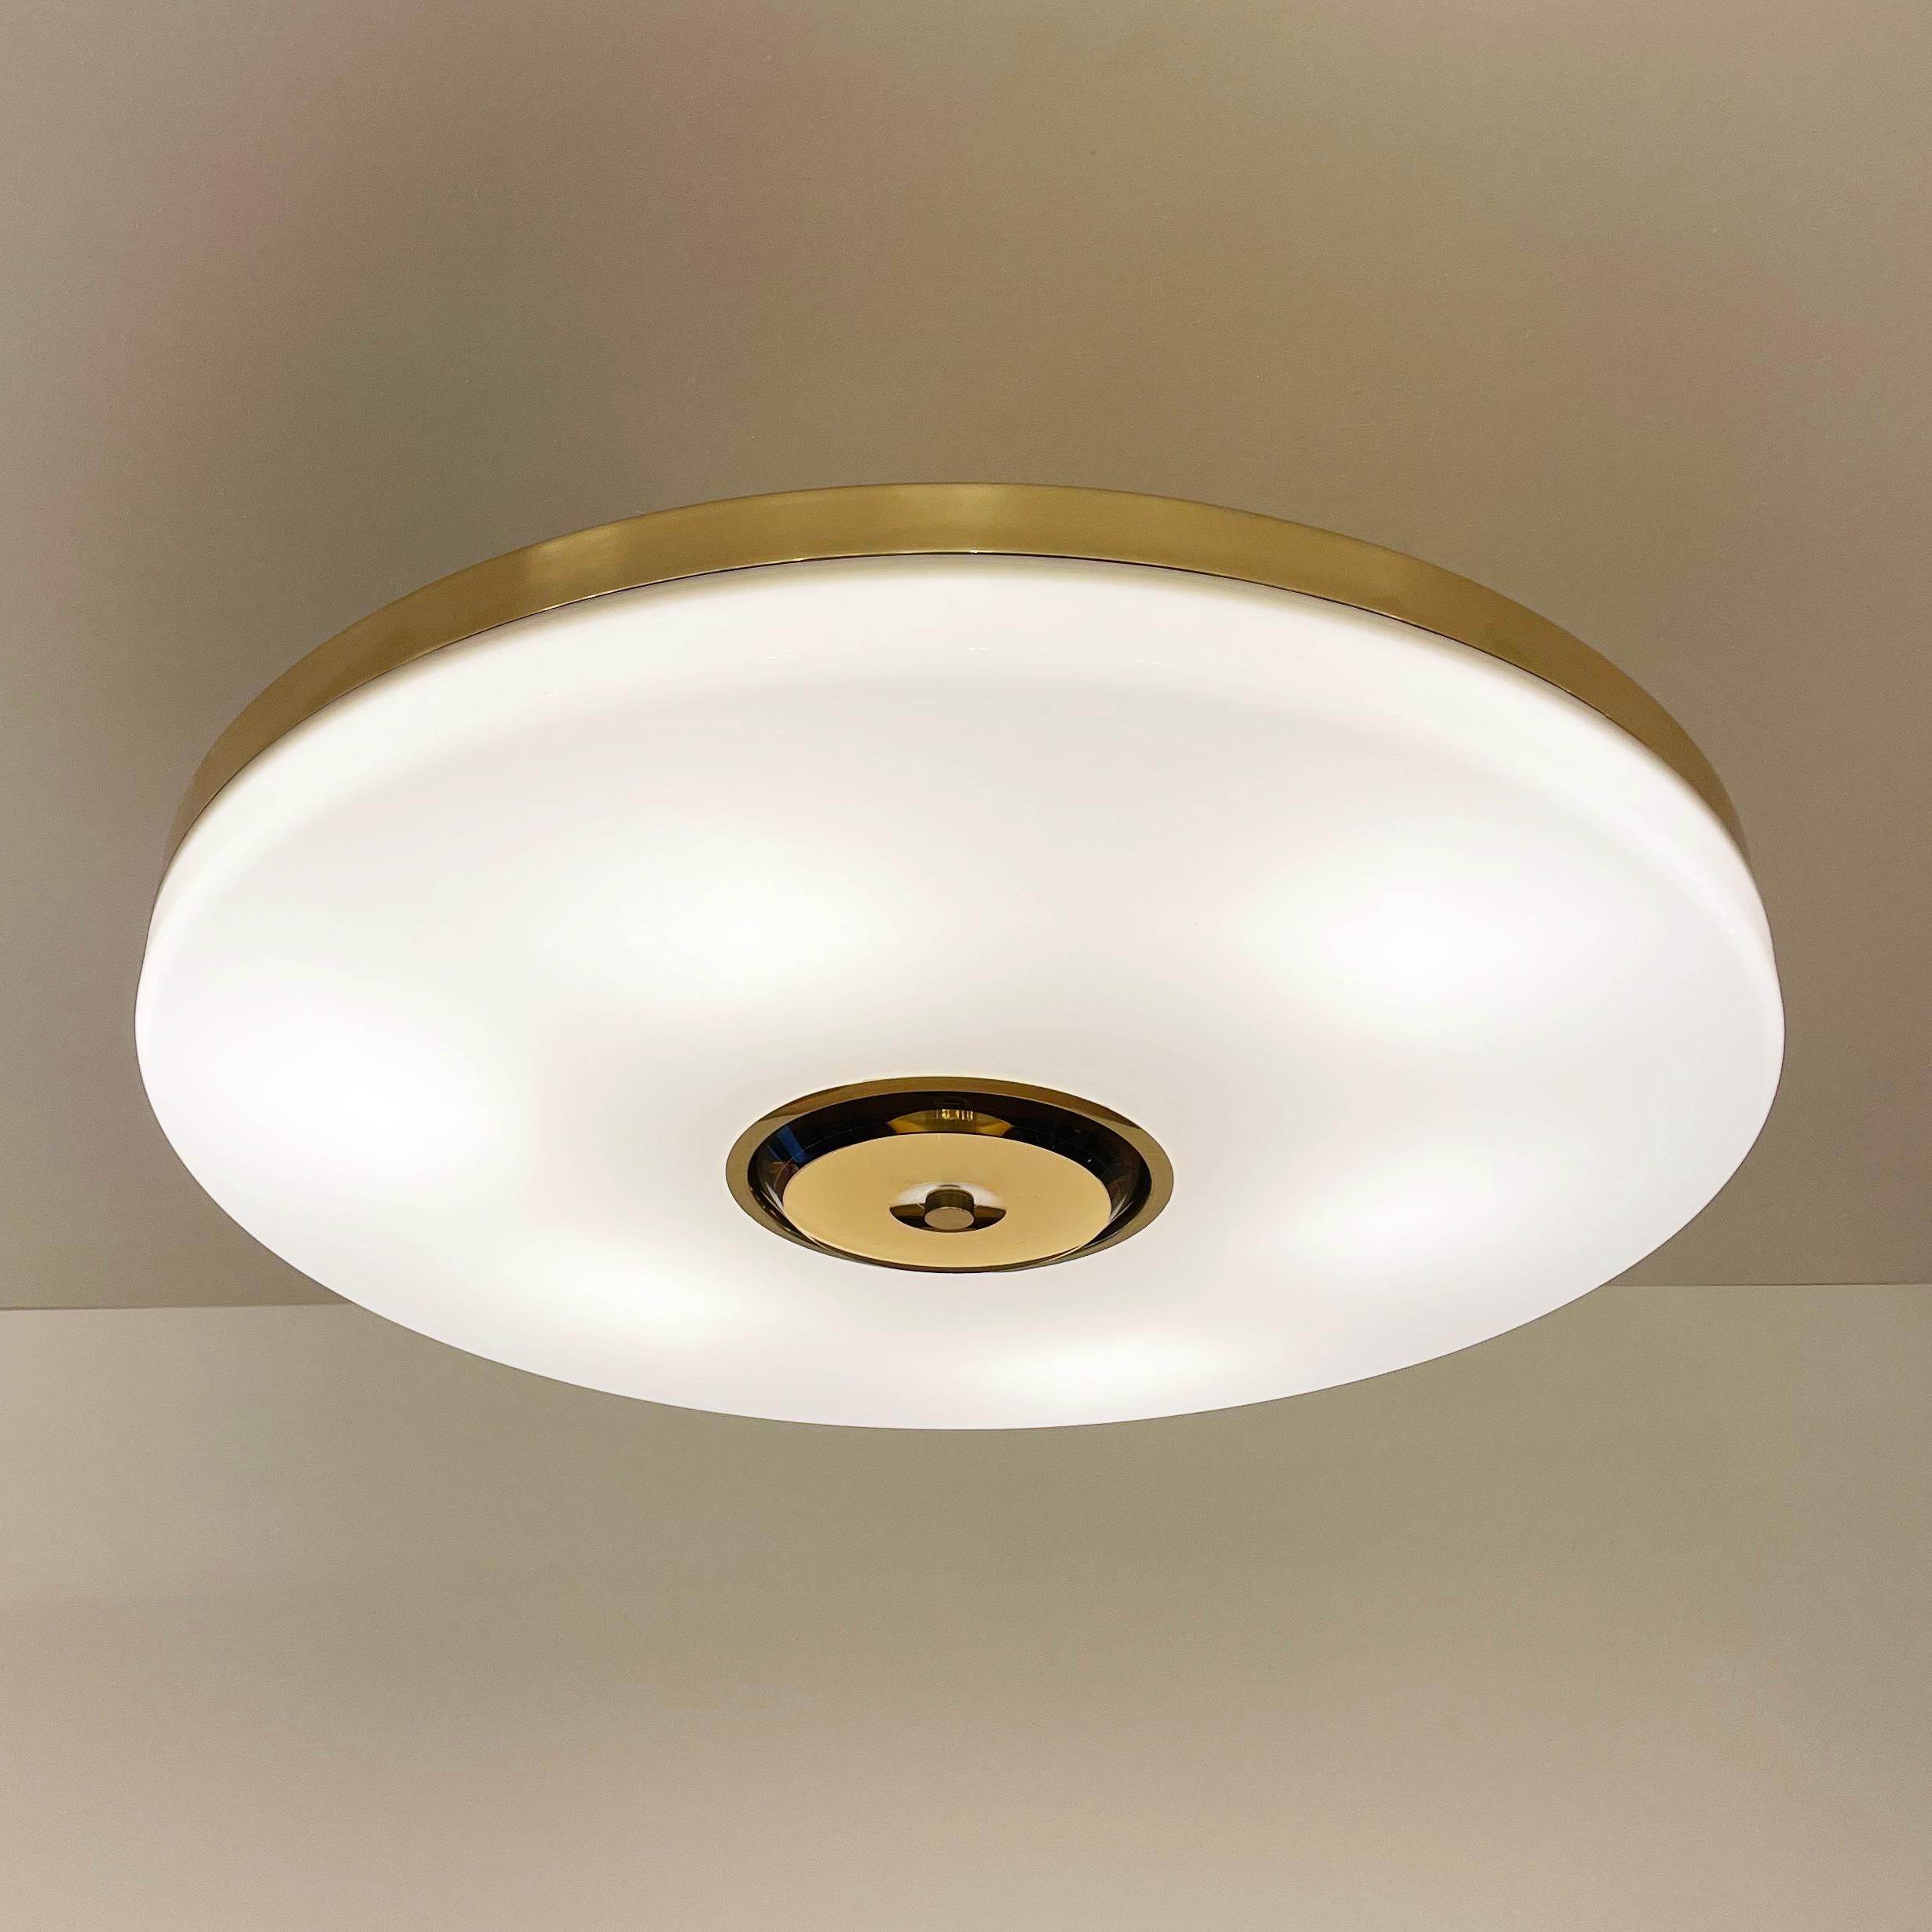 Modern Iris Grande Ceiling Light by Gaspare Asaro - Polished Brass Finish For Sale